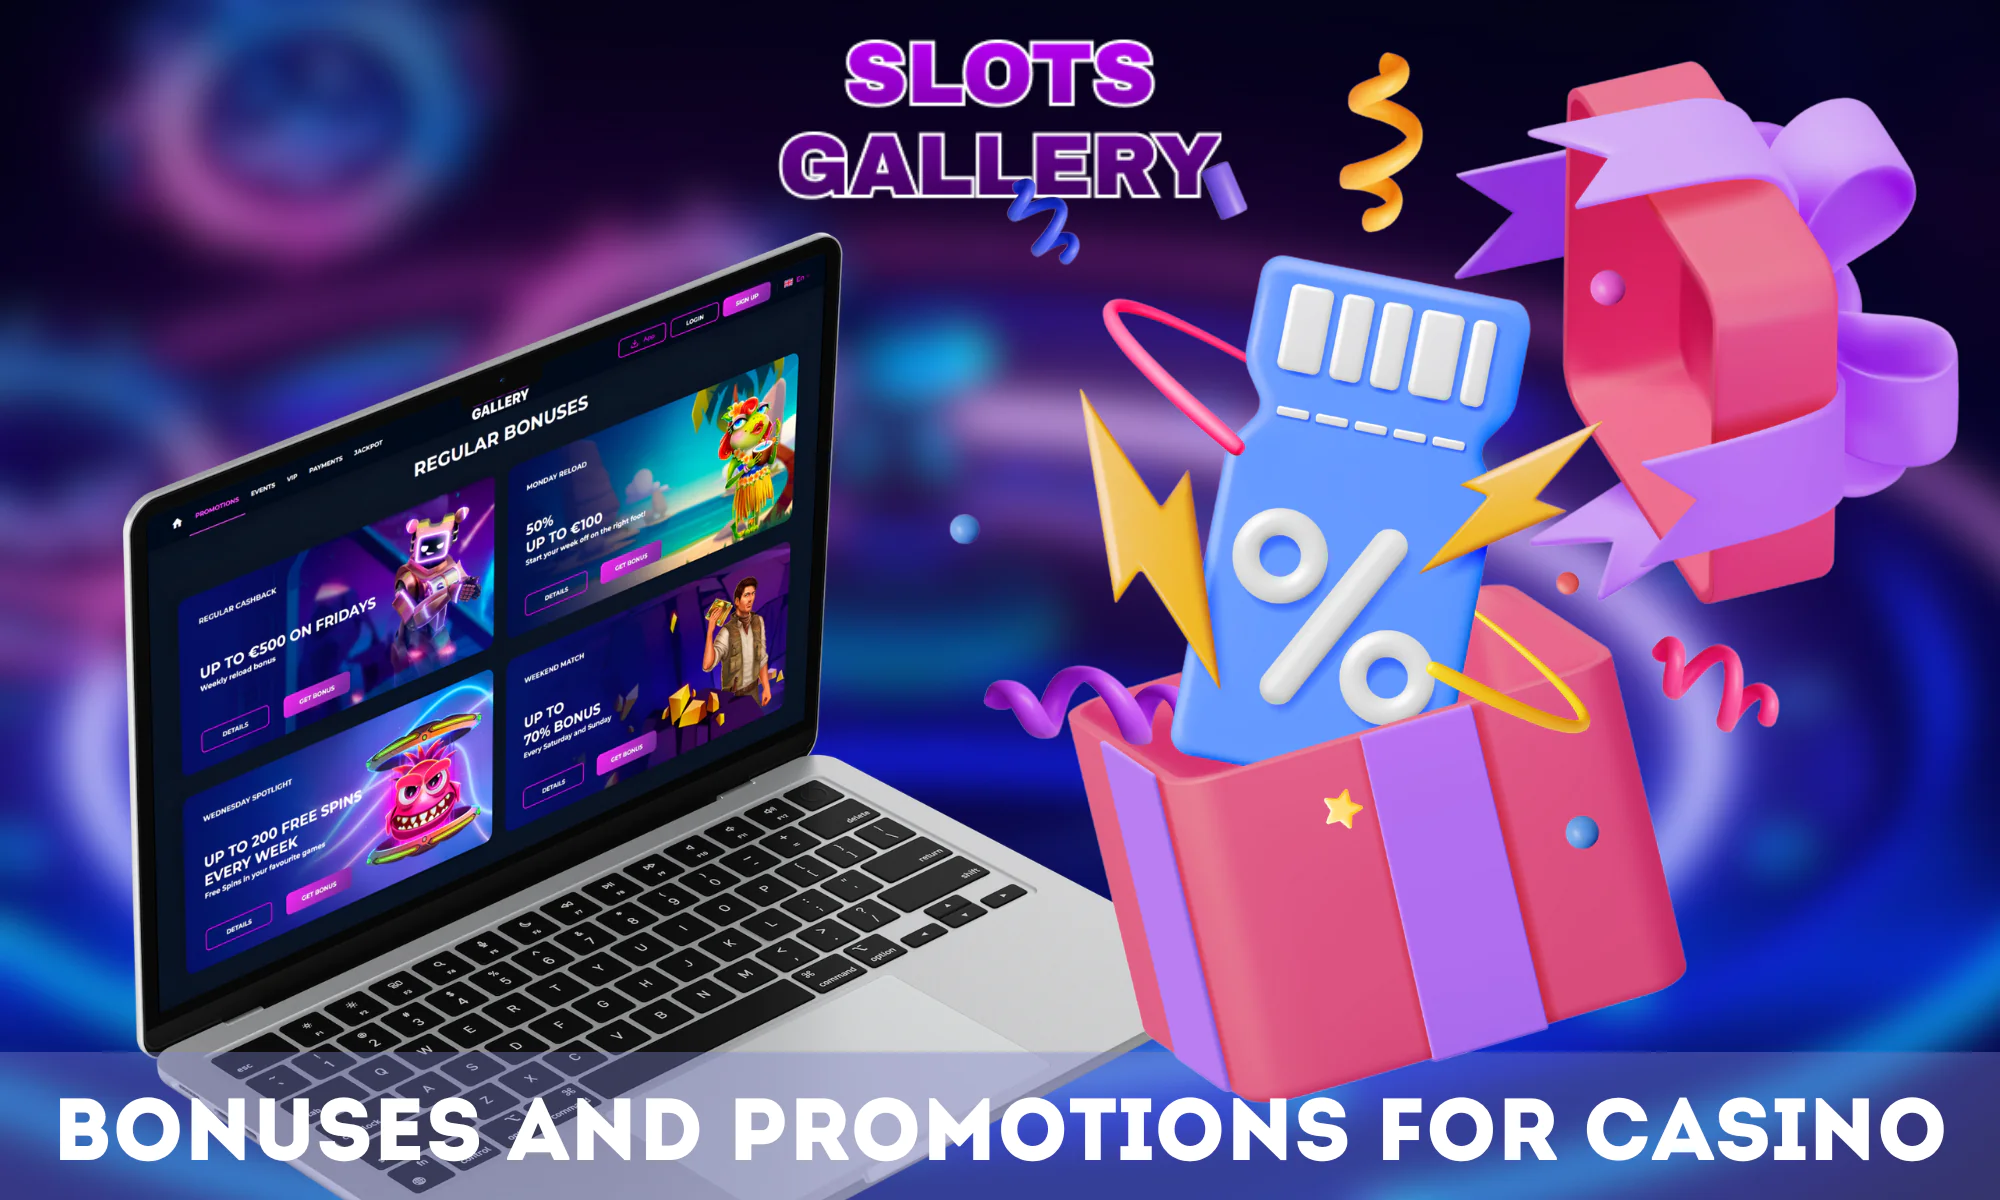 Slots Gallery Casino is known for its attractive bonuses and promotions